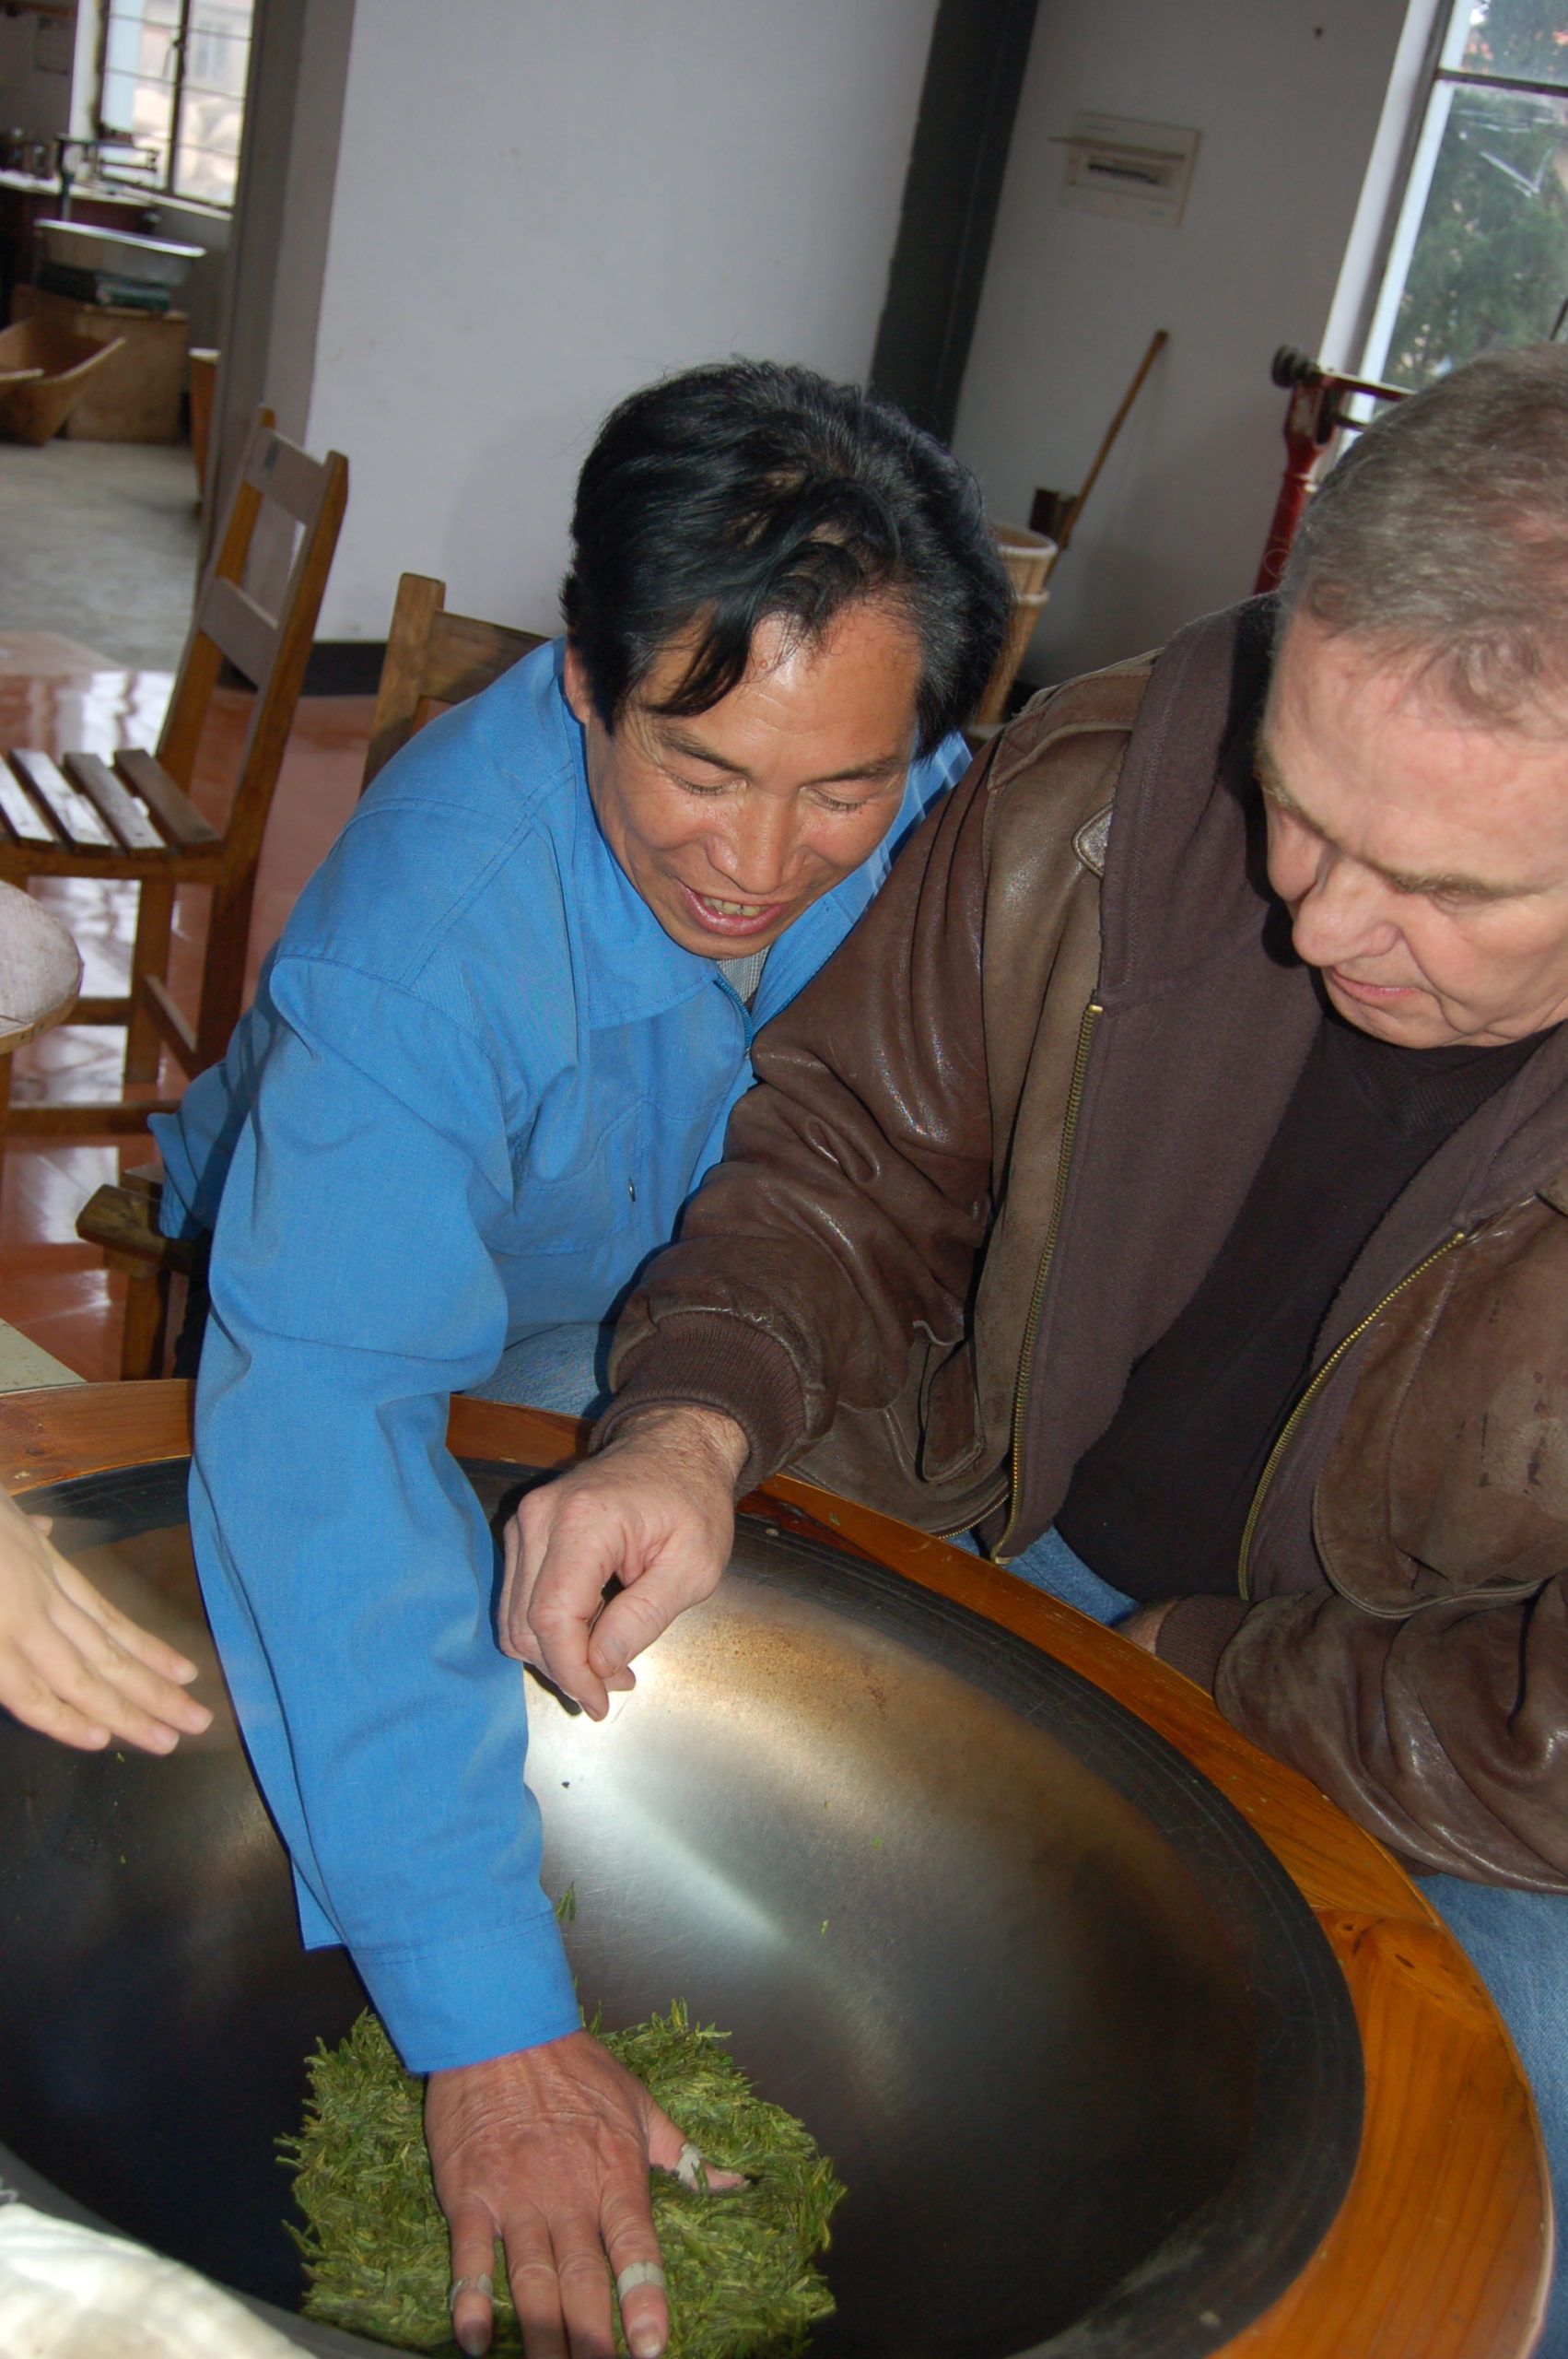 Two men standing over a wok with Longjing green tea leaves in it, one with a hand in the wok demonstrating and one learning.